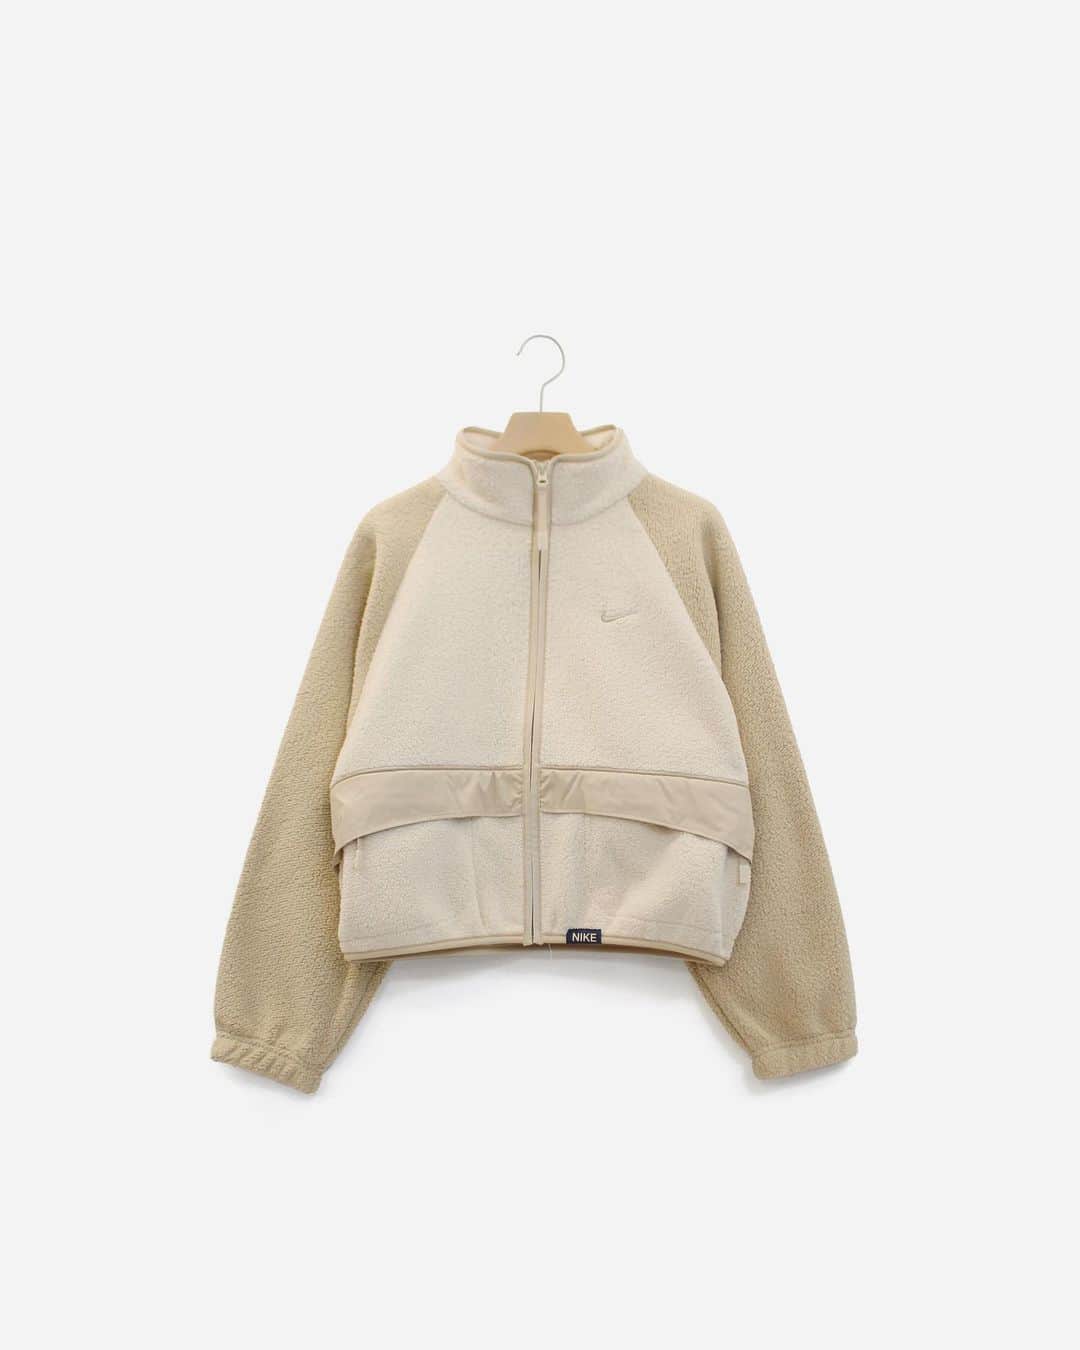 A+Sのインスタグラム：「2021. 2. 1 (mon) in store  ■NIKE WMNS NSW SHERPA CL JACKET COLOR : GRAIN SIZE : XS - XL PRICE : ¥12,000 (+TAX)  お気に入りのカフェで一息。 カフェカルチャーの雰囲気にインスパイアされたジャケット。豊かで温かみのあるお気に入りのラテがベースカラーになっています。非常に柔らかく羊毛のようなシェルパ生地で作られ、冷えきった体を温め快適に過ごせます。ゆったりとしたフィット感で簡単に重ね着でき、のんびりとした一時を引き立てる一着に仕上がっています。  Take a break at your favorite cafe. A jacket inspired by the atmosphere of cafe culture. The rich and warm favorite latte is the base color. Made from a very soft, wool-like Sherpa fabric, it keeps your cold body warm and comfortable. It has a loose fit and can be easily layered, making it a perfect companion for a relaxing moment.   #a_and_s #NIKE #NIKESOPRTSWEAR #NIKECAFFELATTEPACK」